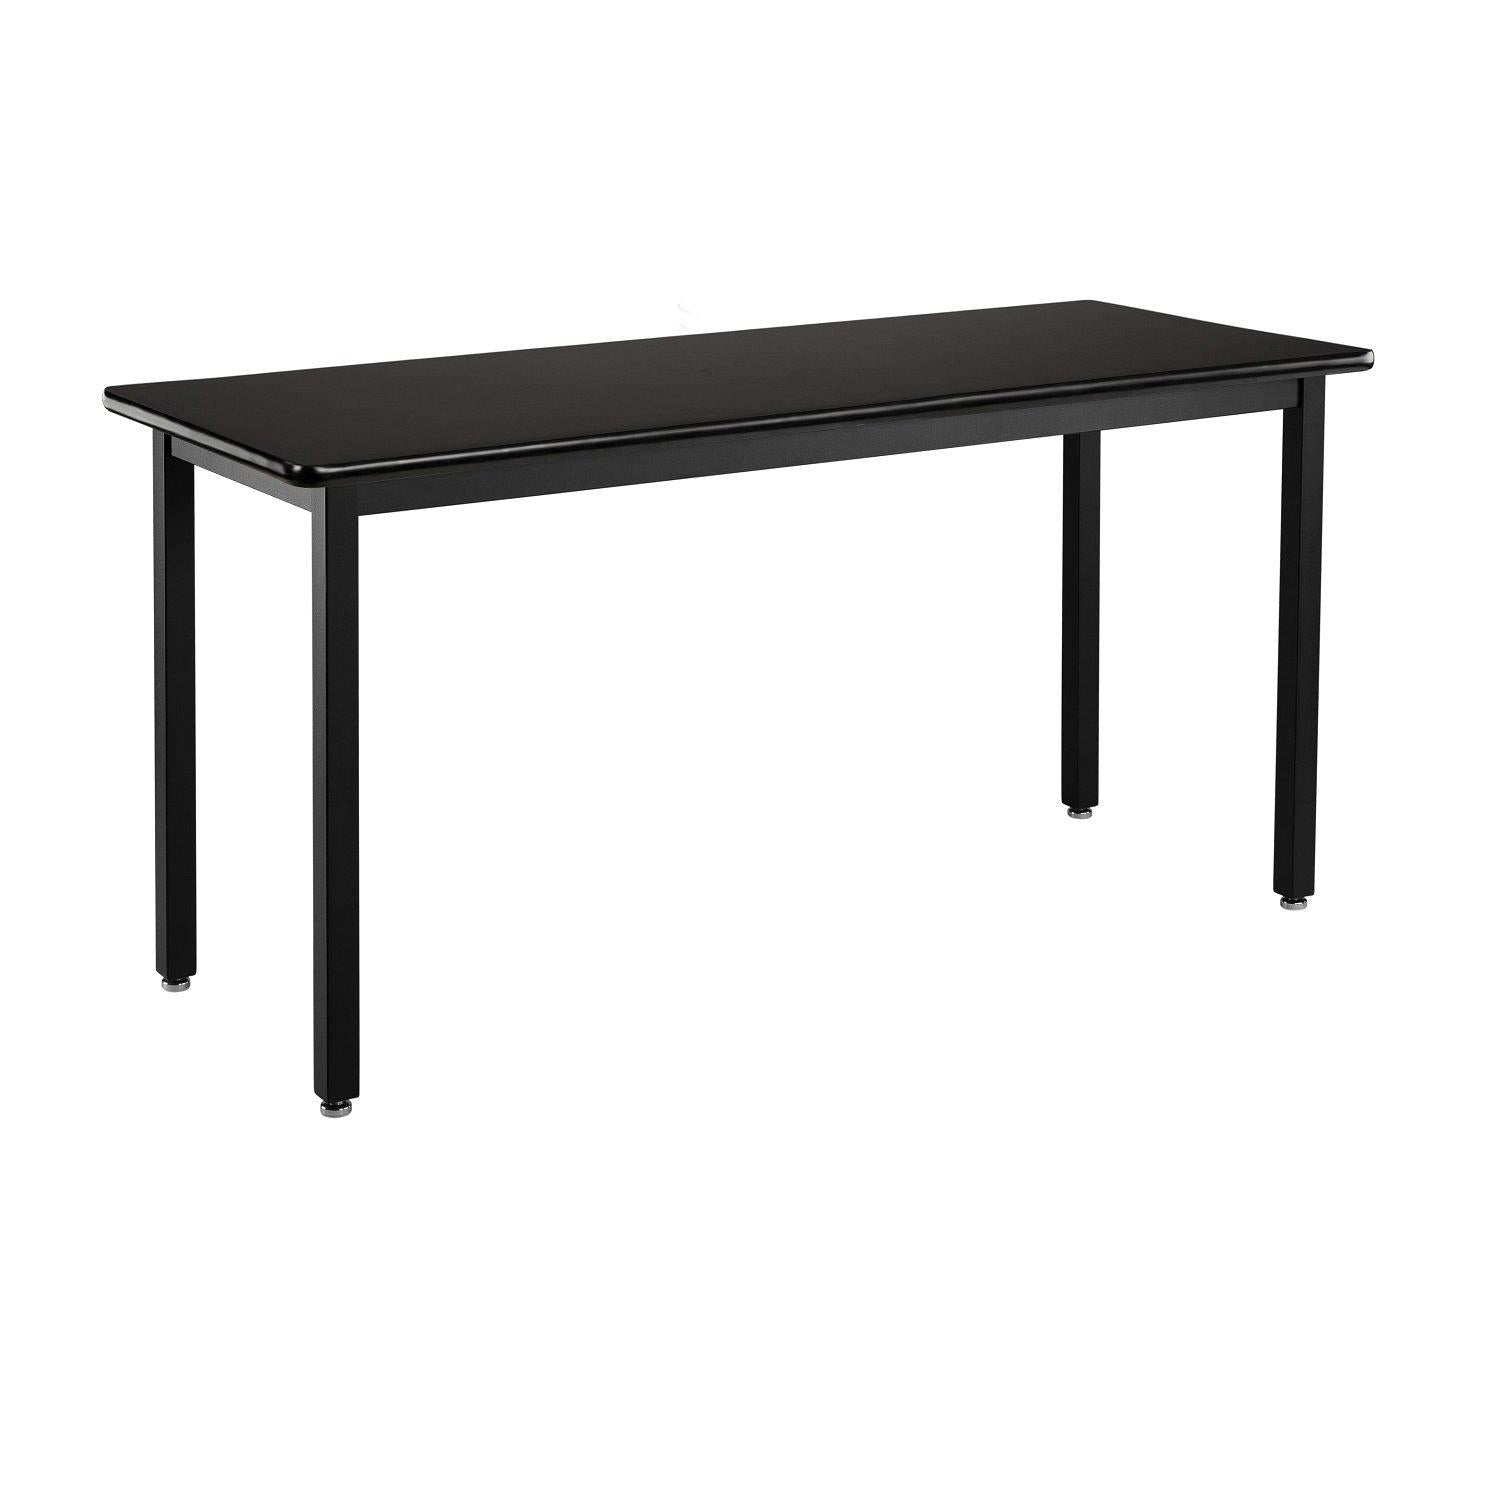 Heavy-Duty Fixed Height Utility Table, Black Frame, 24" x 42", High-Pressure Laminate Top with T-Mold Edge